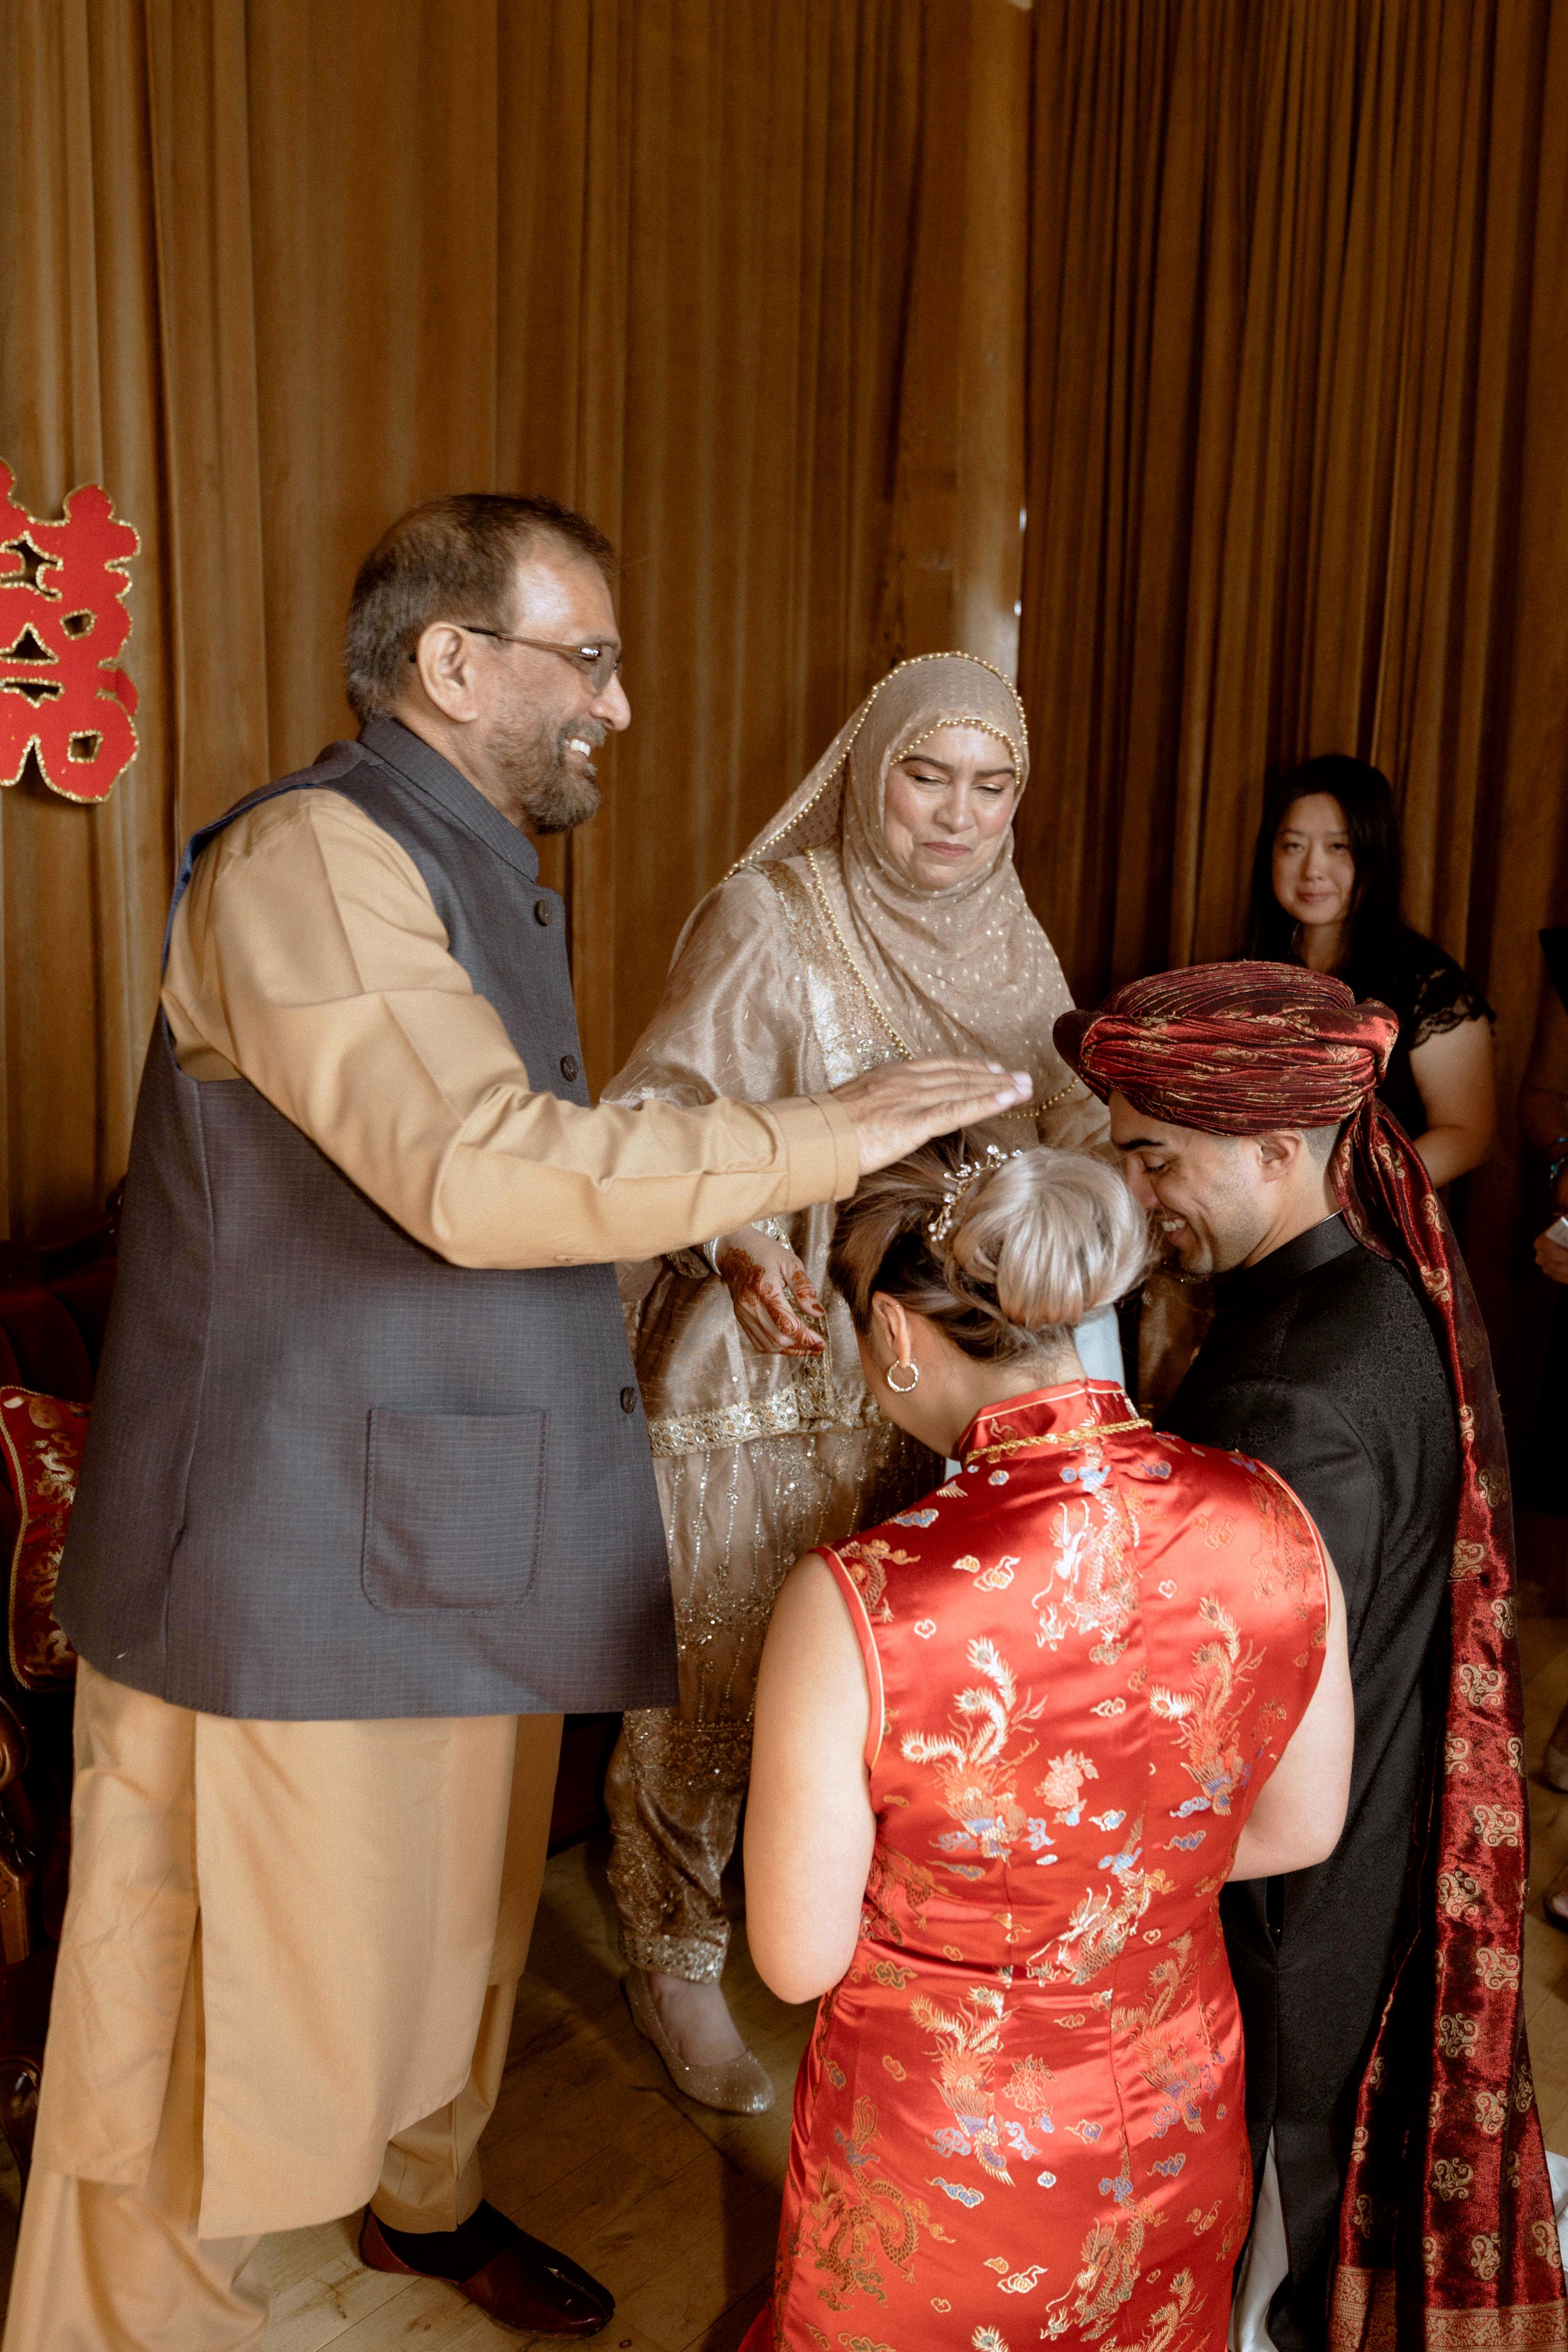 Wedding ceremony for a multicultural wedding ceremony